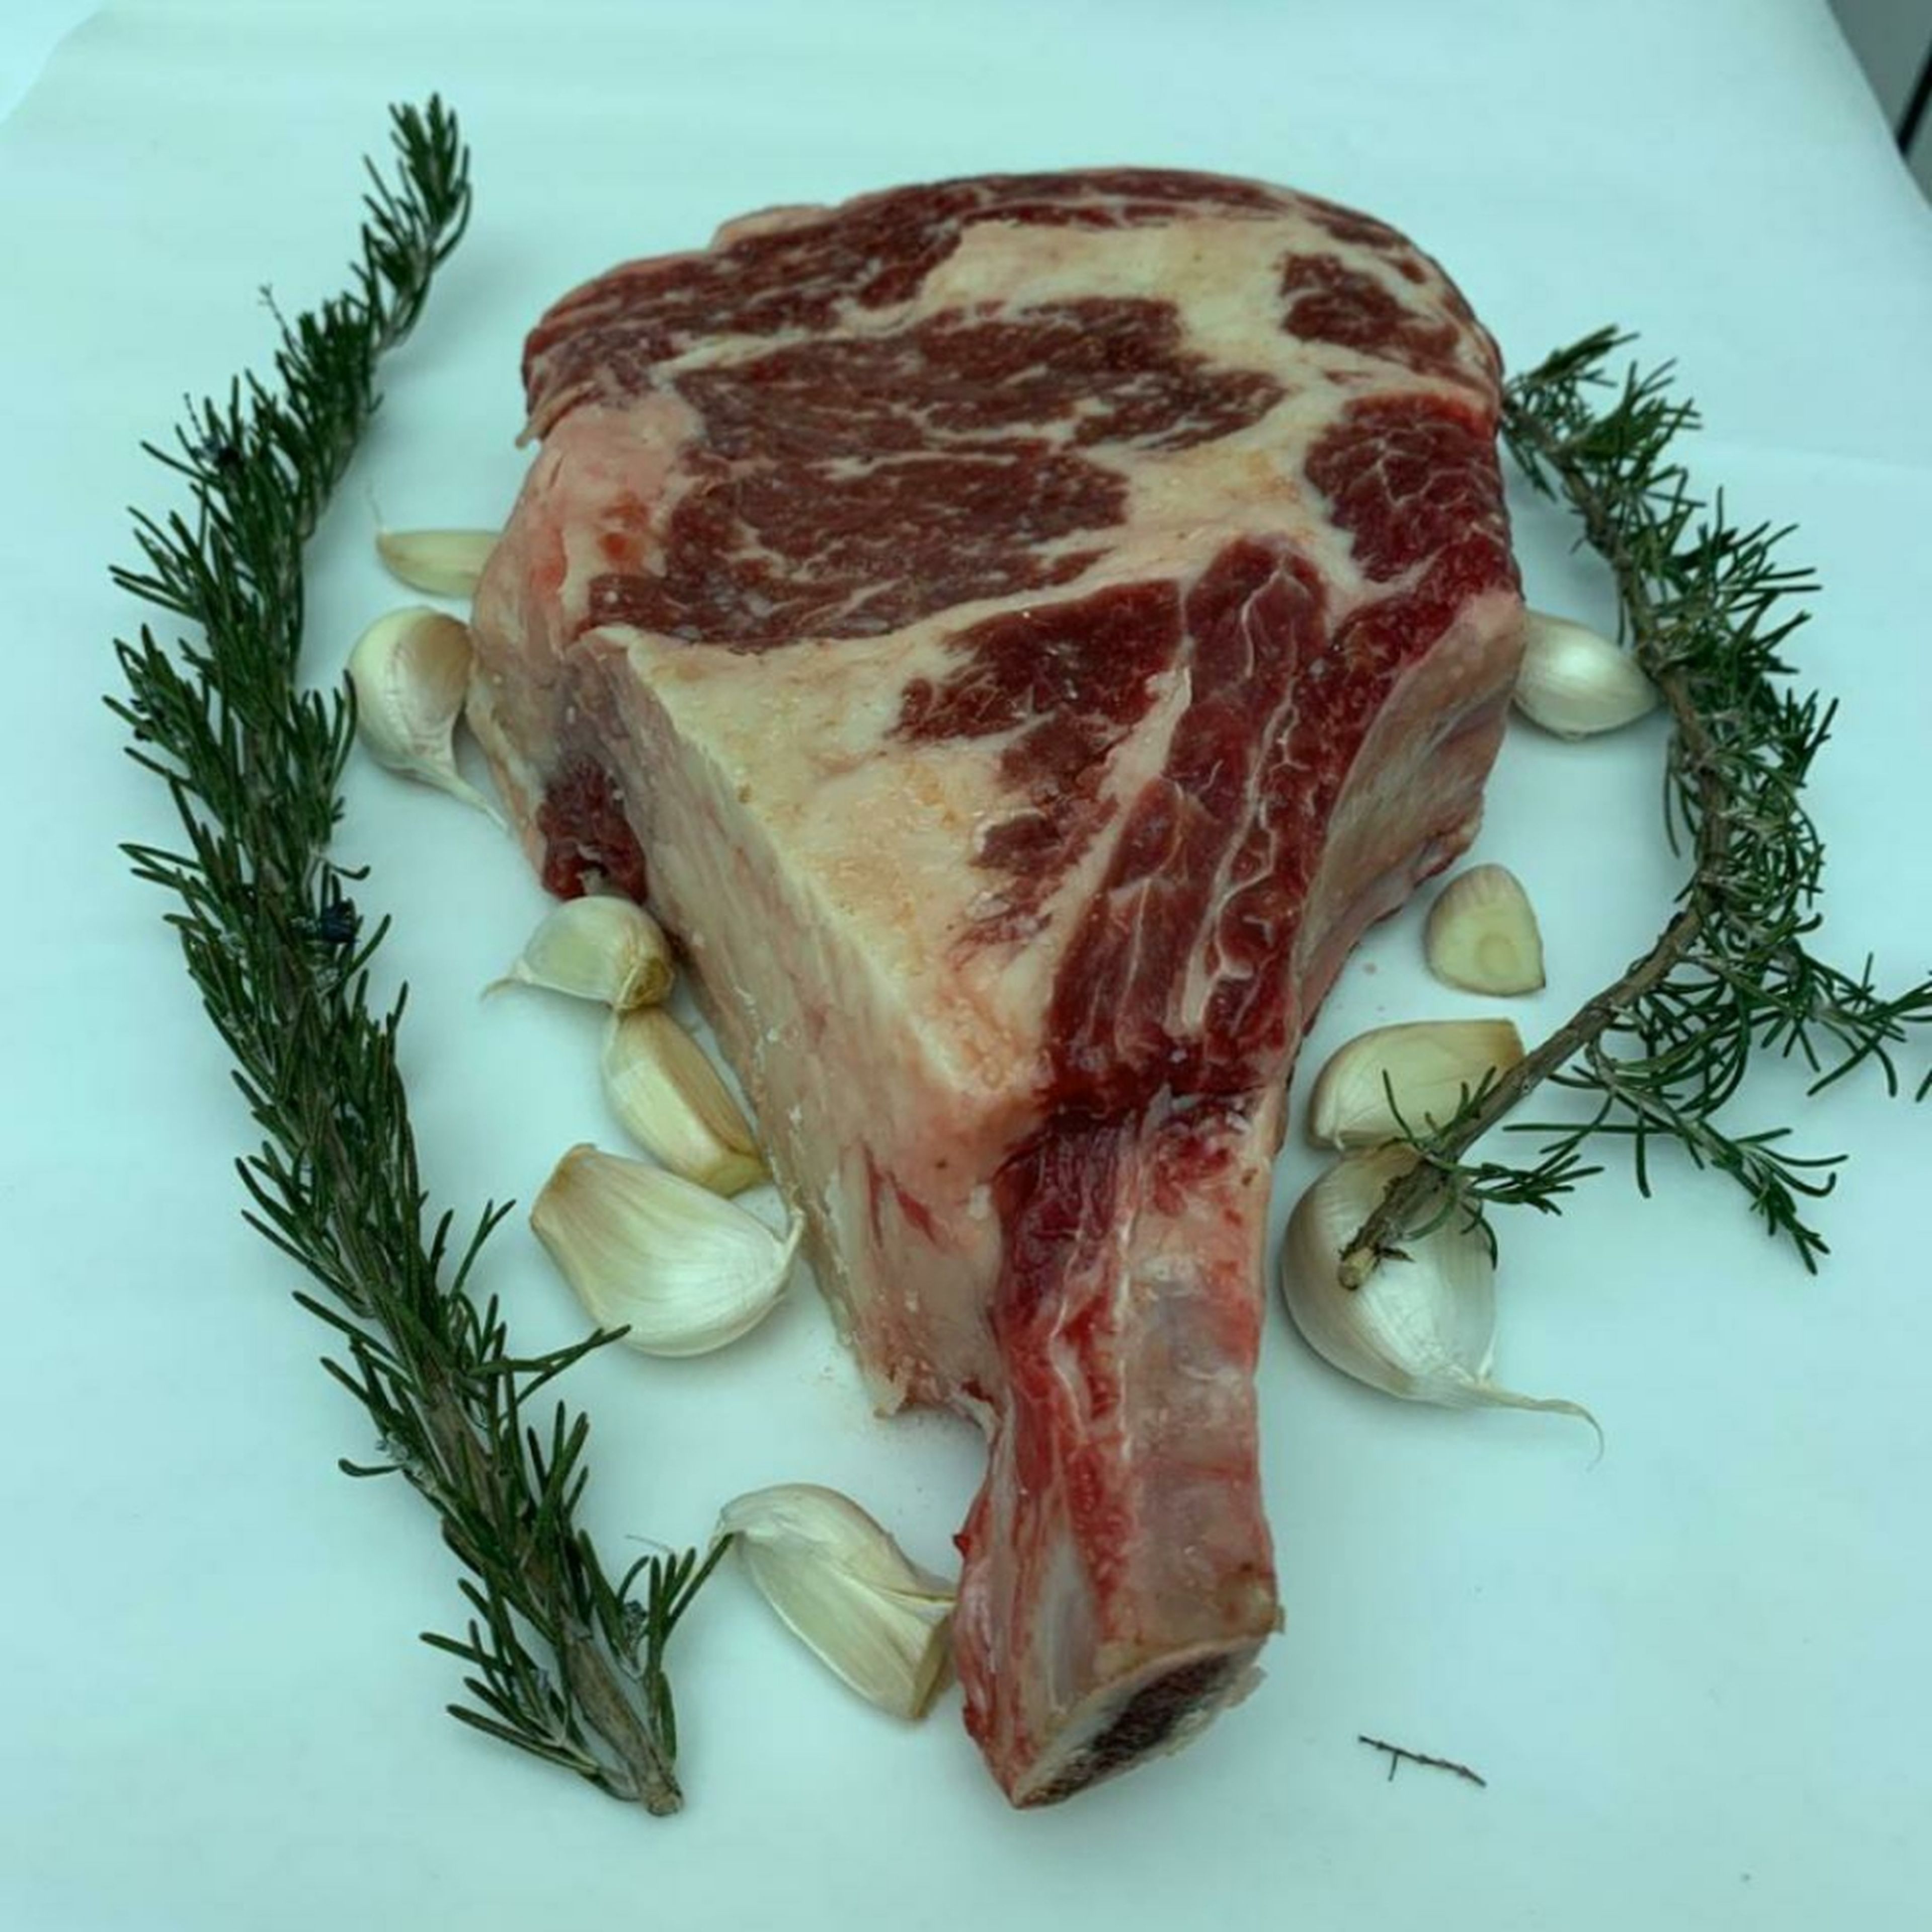 keep steak at room temperature for 1 hour sprinkle generously with salt. Then place the steak in a large baking sheet together with garlic cloves and rosemary branches (if not available use dried rosemary)